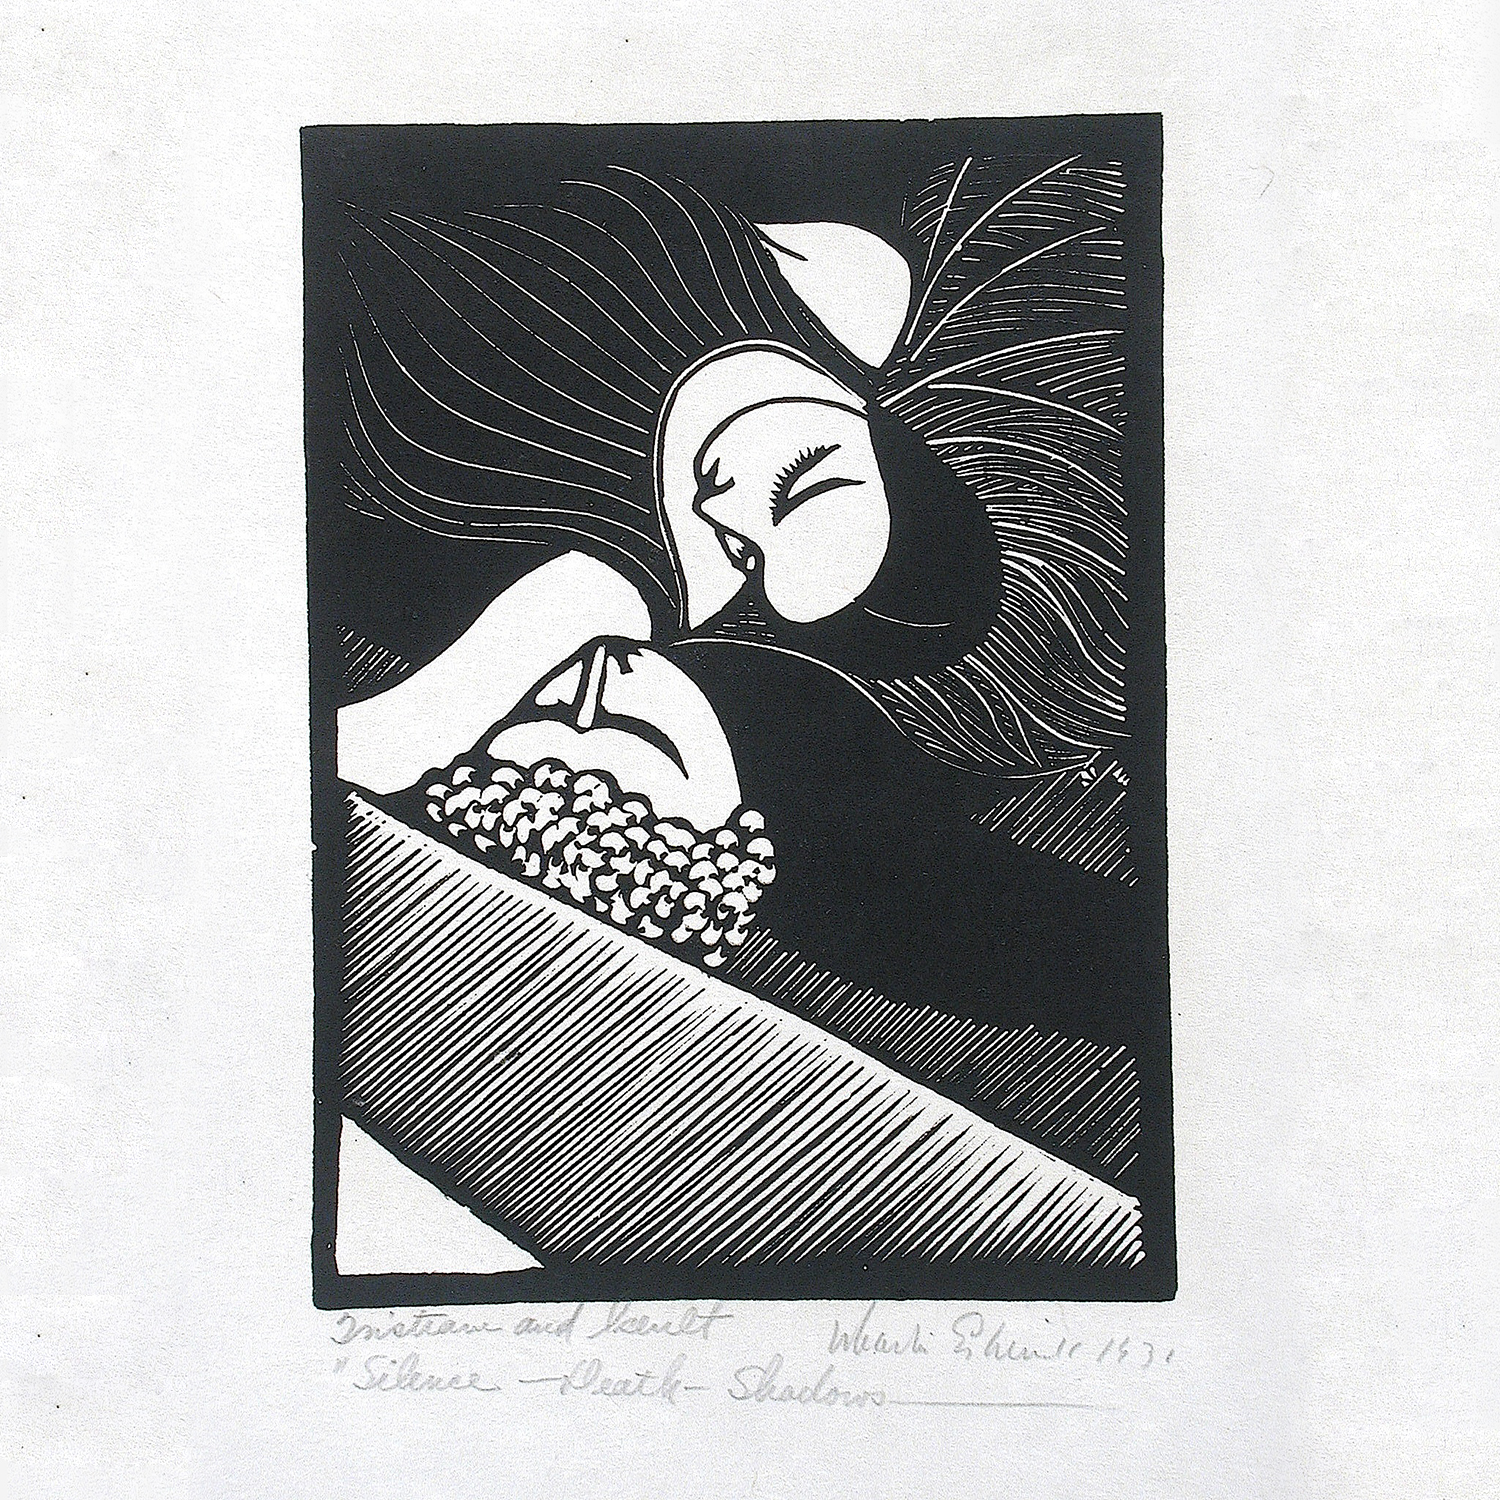 Tristram and Iseult – Silence – Death – Shadows by Wharton Esherick, 1931 DETAIL